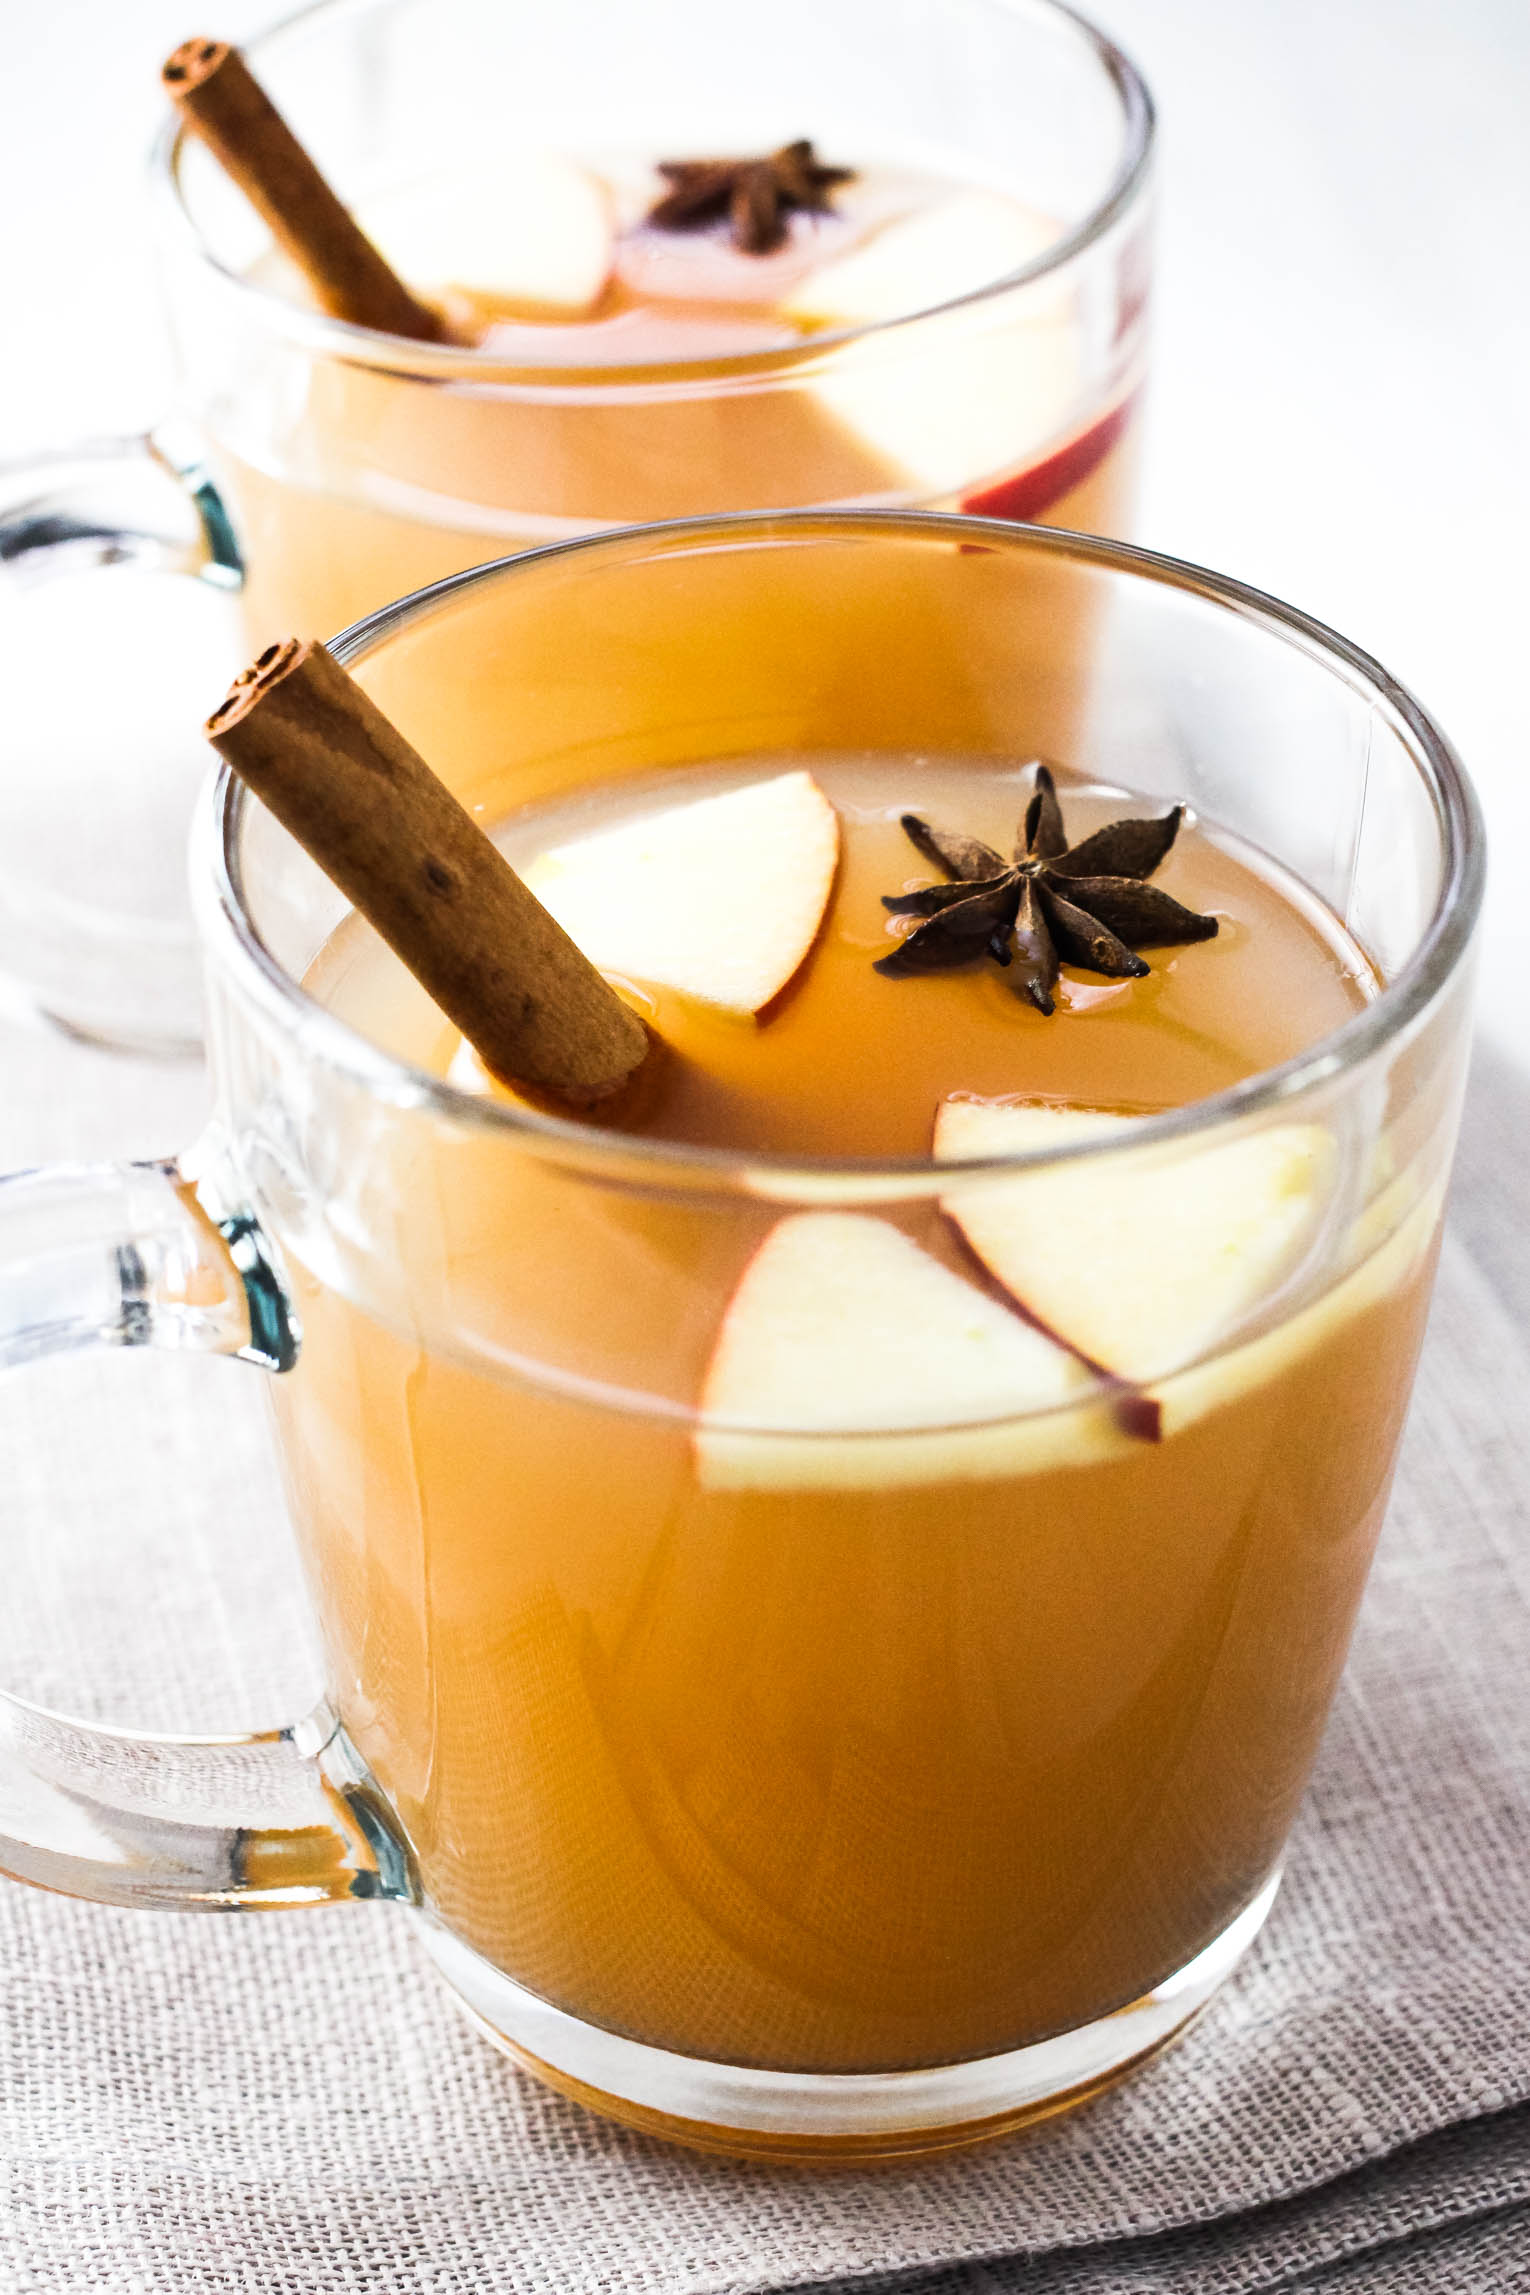 Two mugs with hot apple cider garnished with cinnamon sticks, apple slices and anise star.